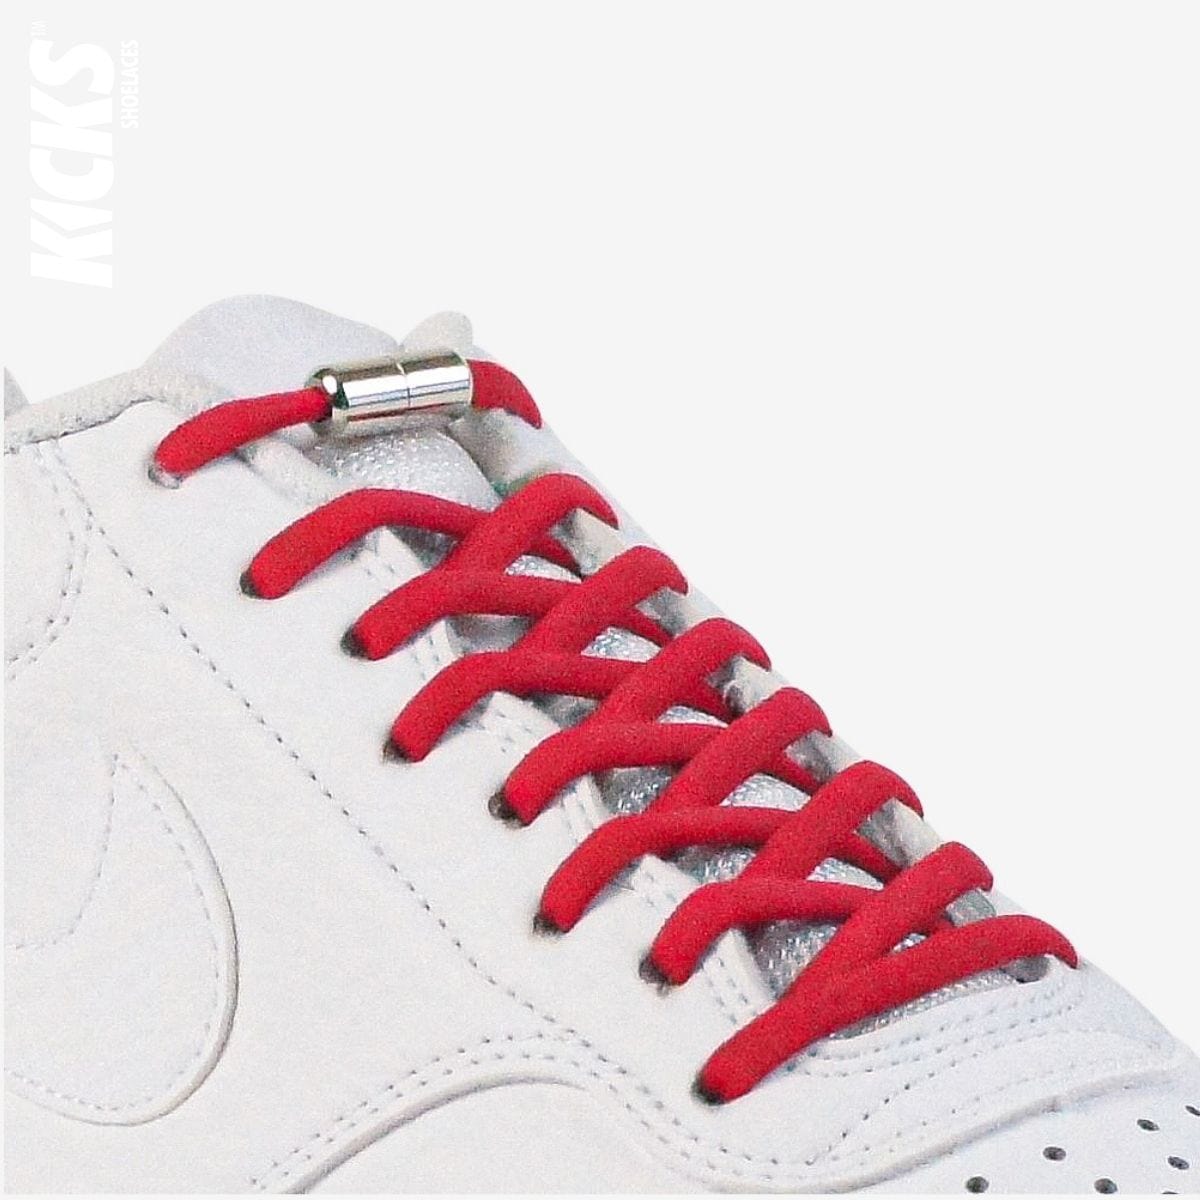 kids-cool-laces-in-red-on-white-kicks